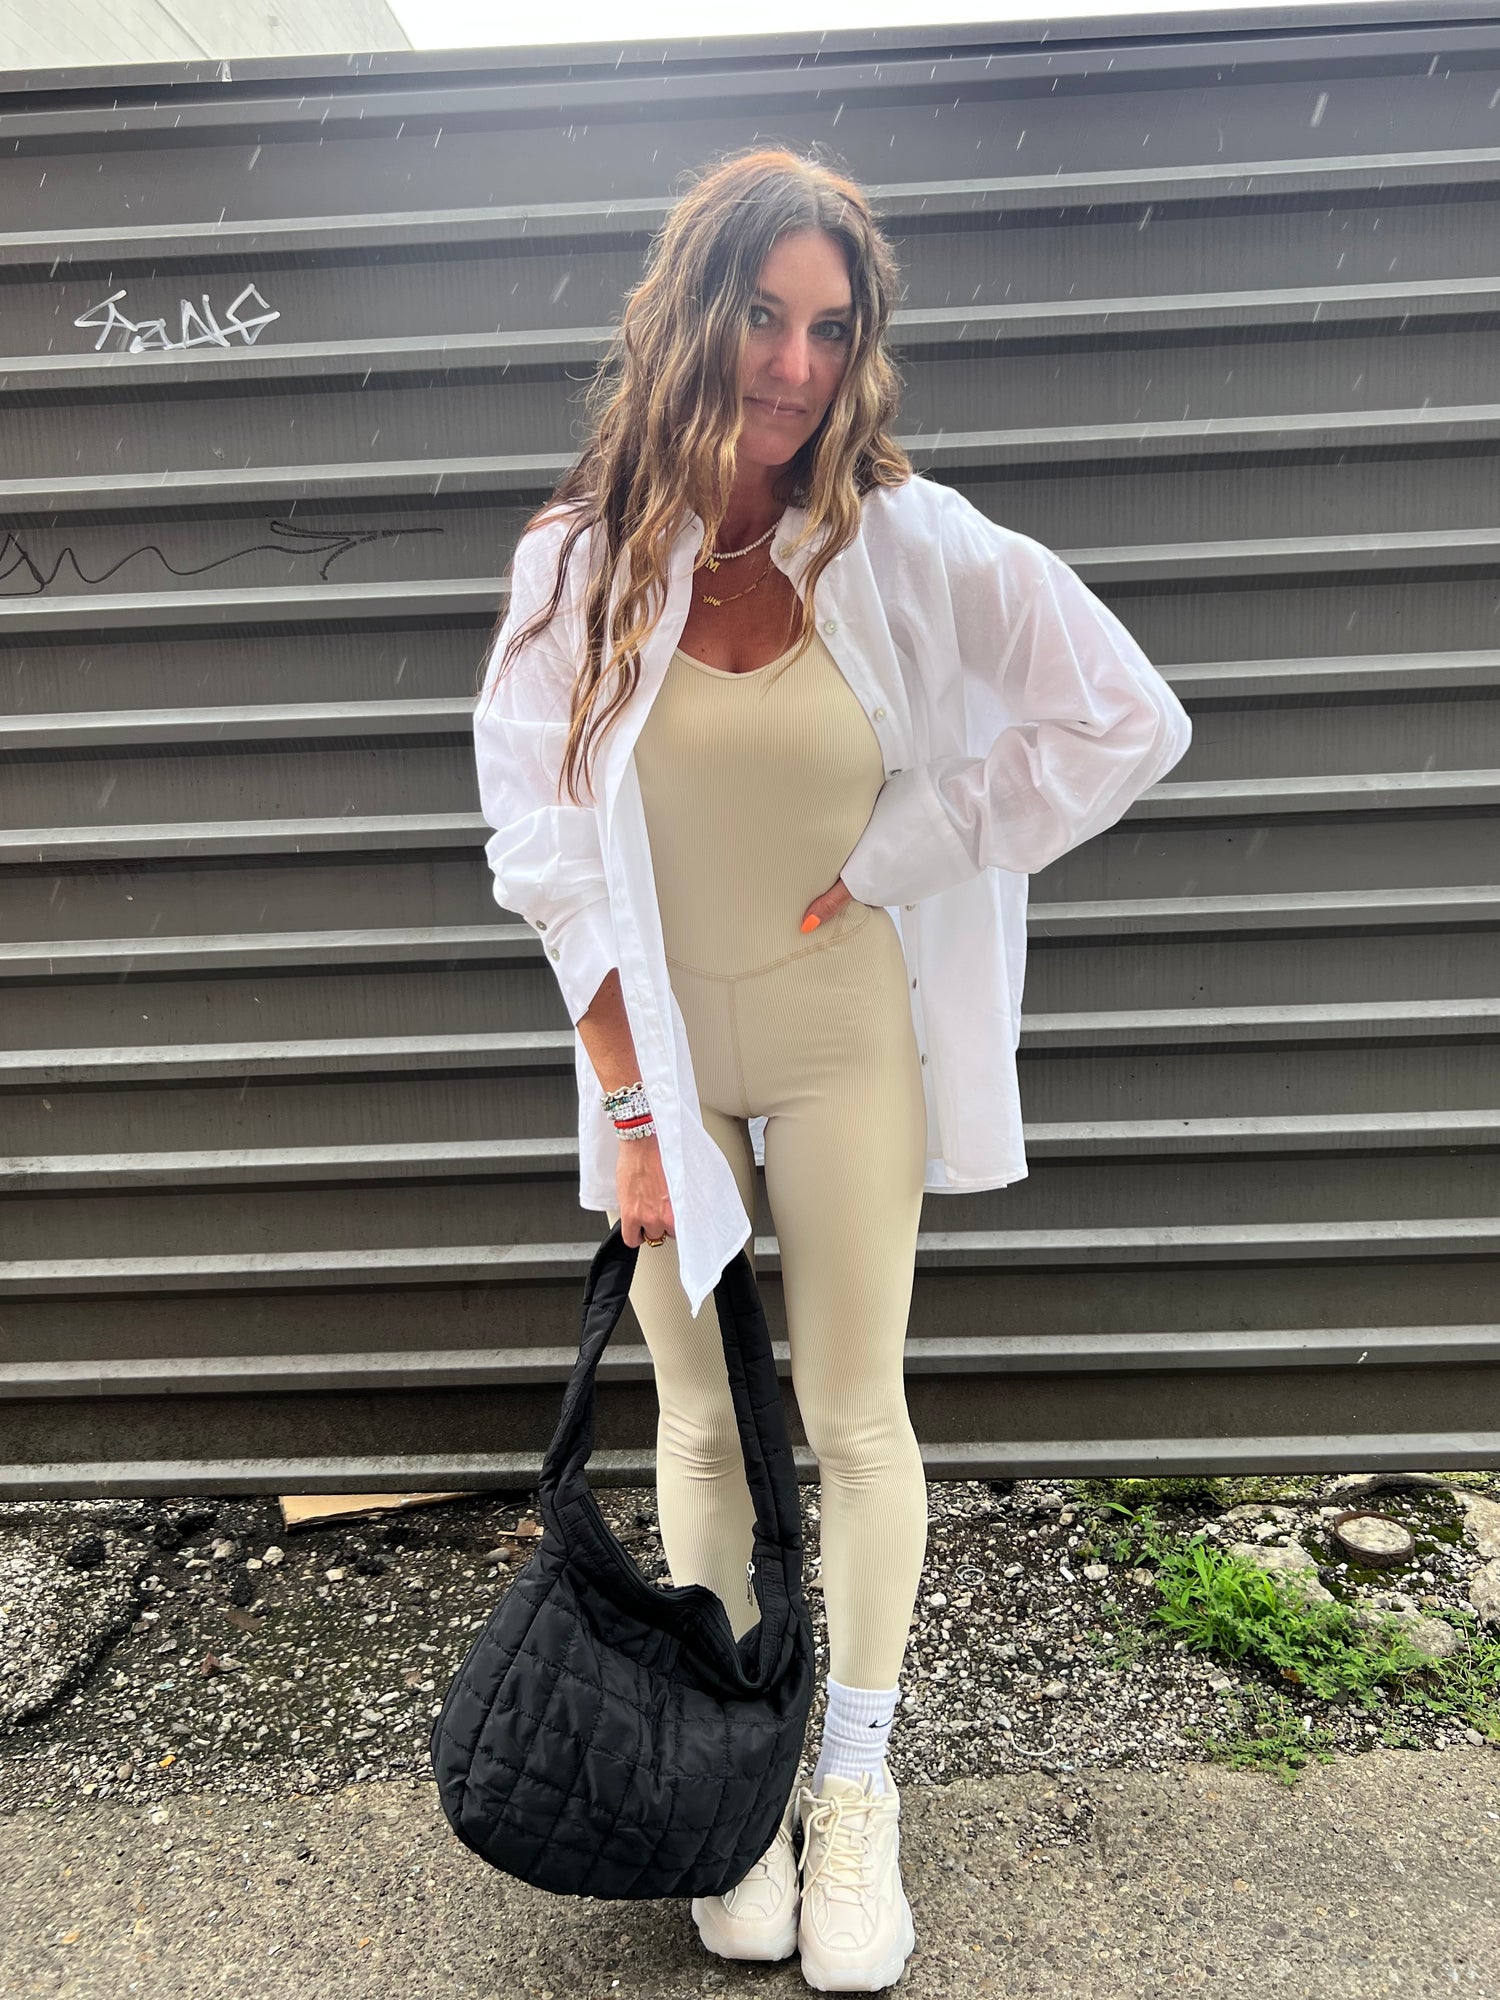 RIBBED ATHLEISURE JUMPSUIT IN IVORY - THE HIP EAGLE BOUTIQUE